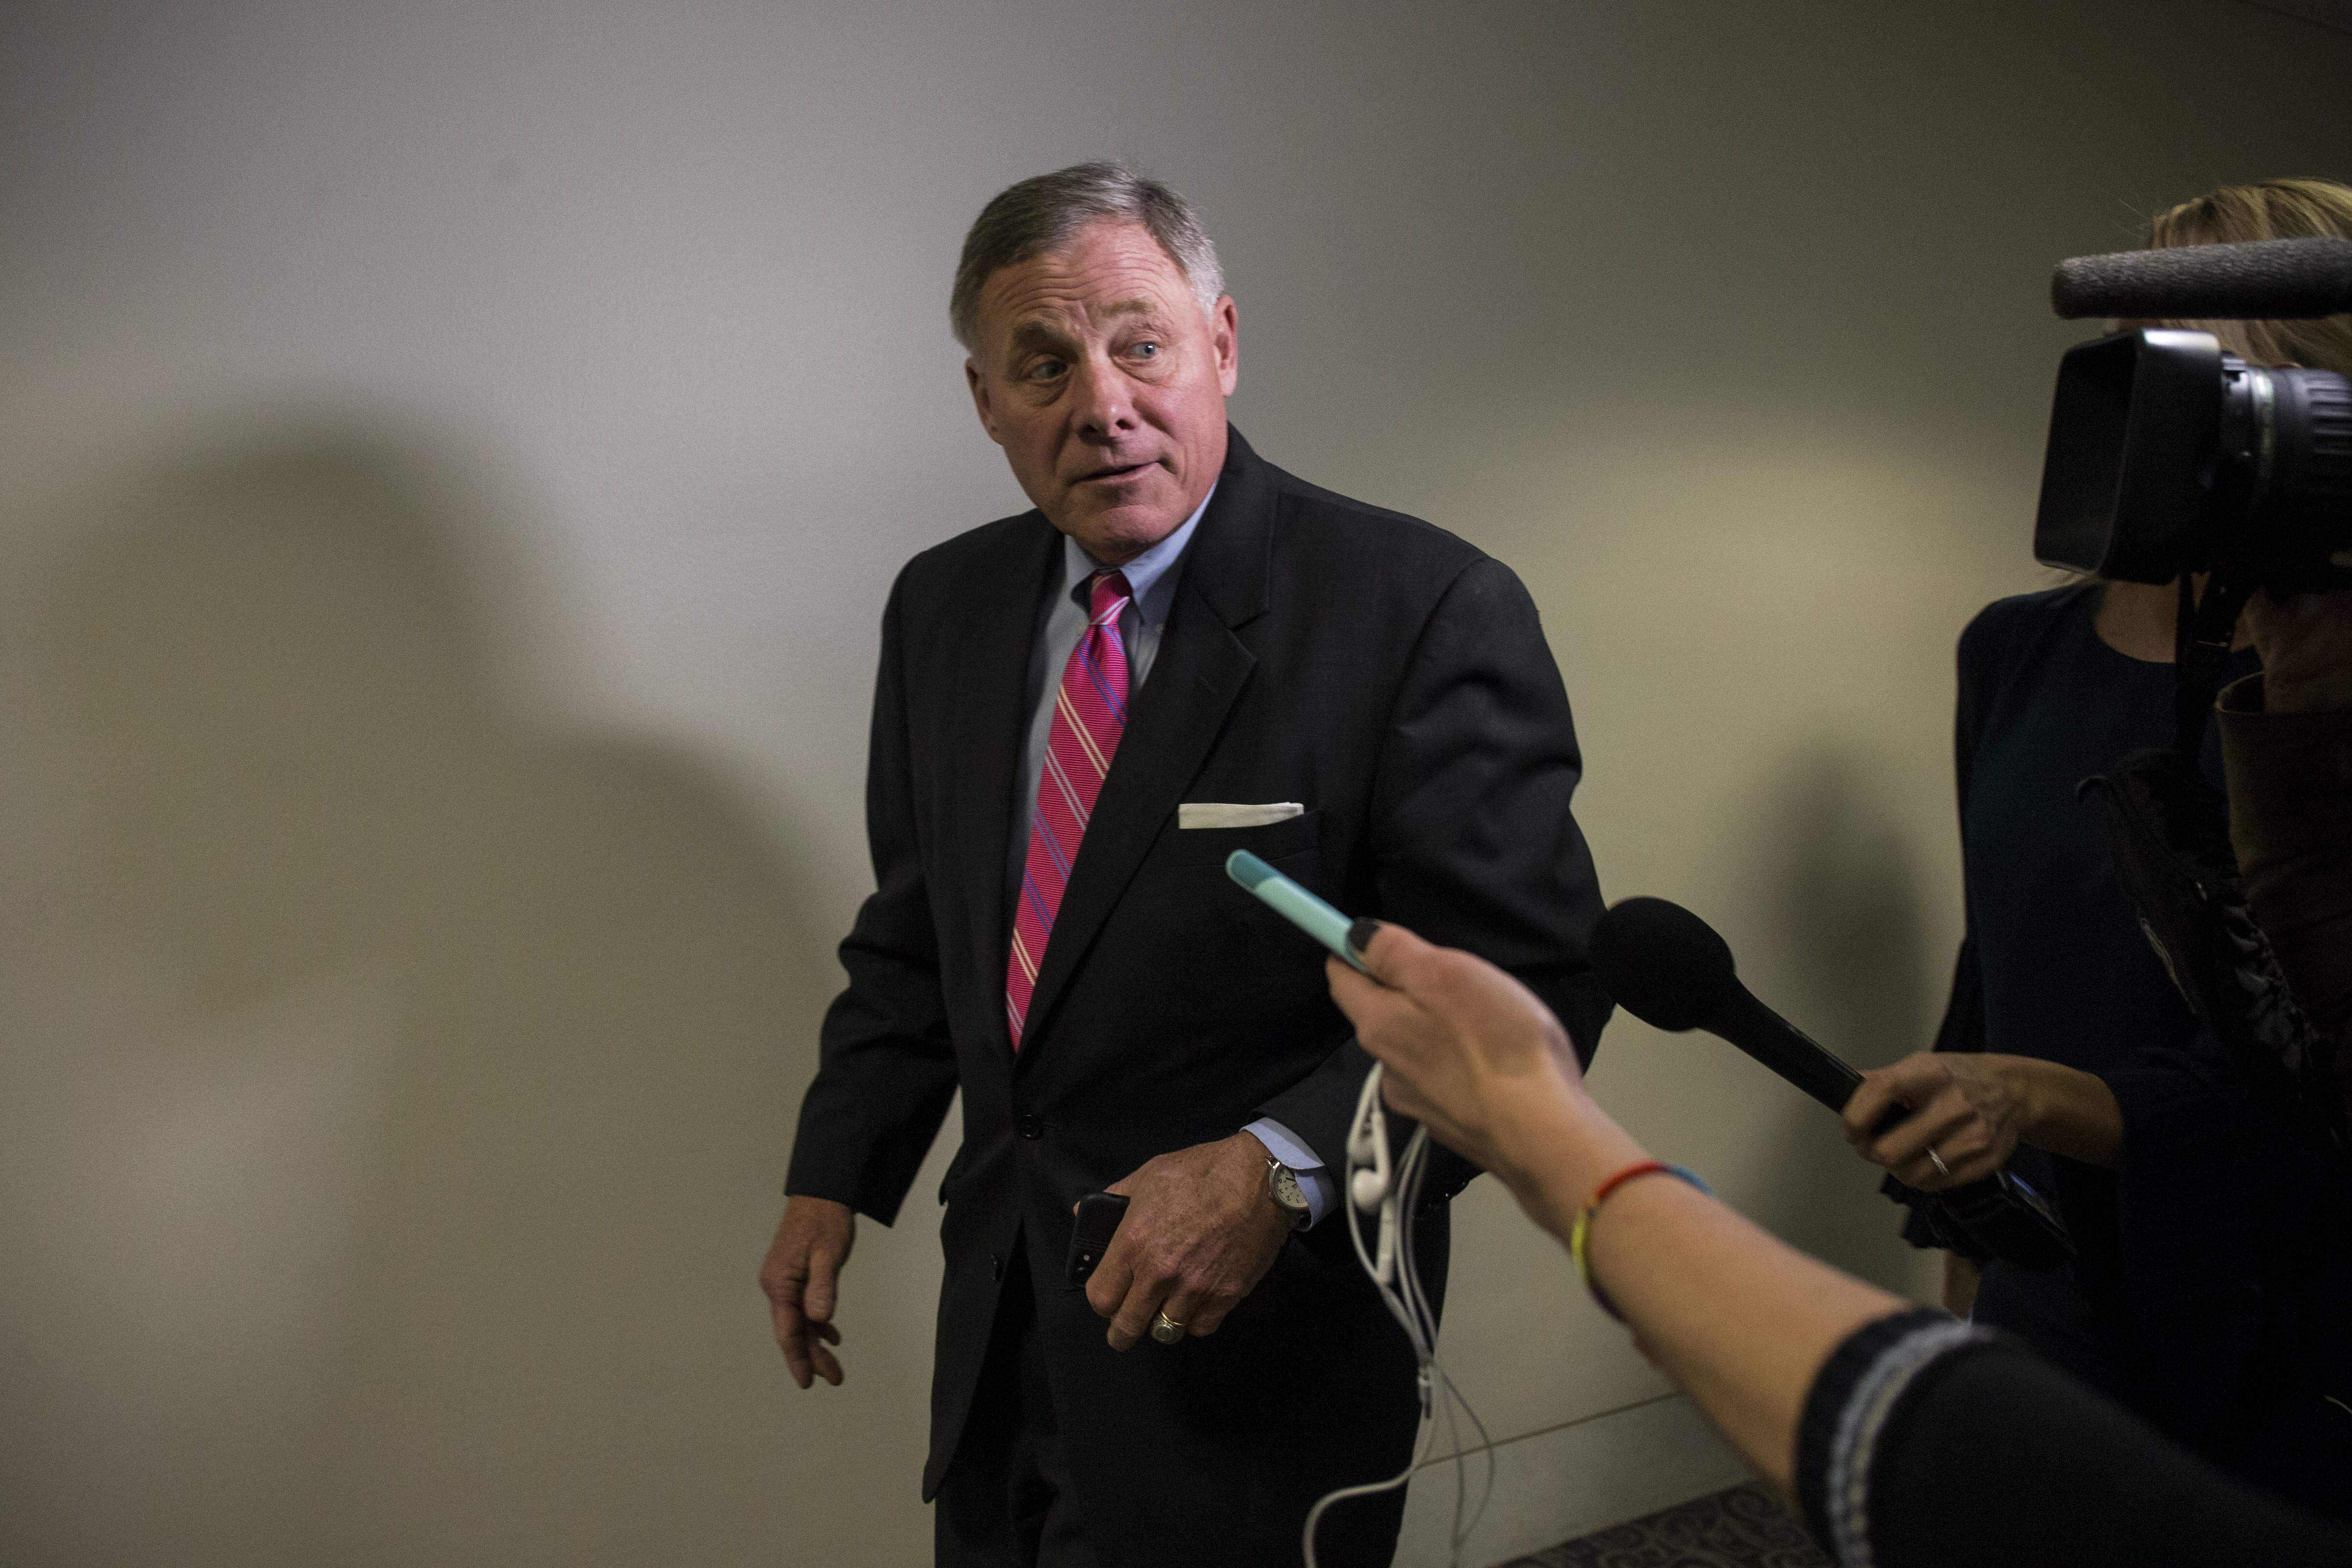 Senate Intelligence Committee Chairman Sen. Richard Burr leaves a closed briefing on intelligence matters on Capitol Hill on December 4, 2018 in Washington, DC. (Photo by Zach Gibson/Getty Images)